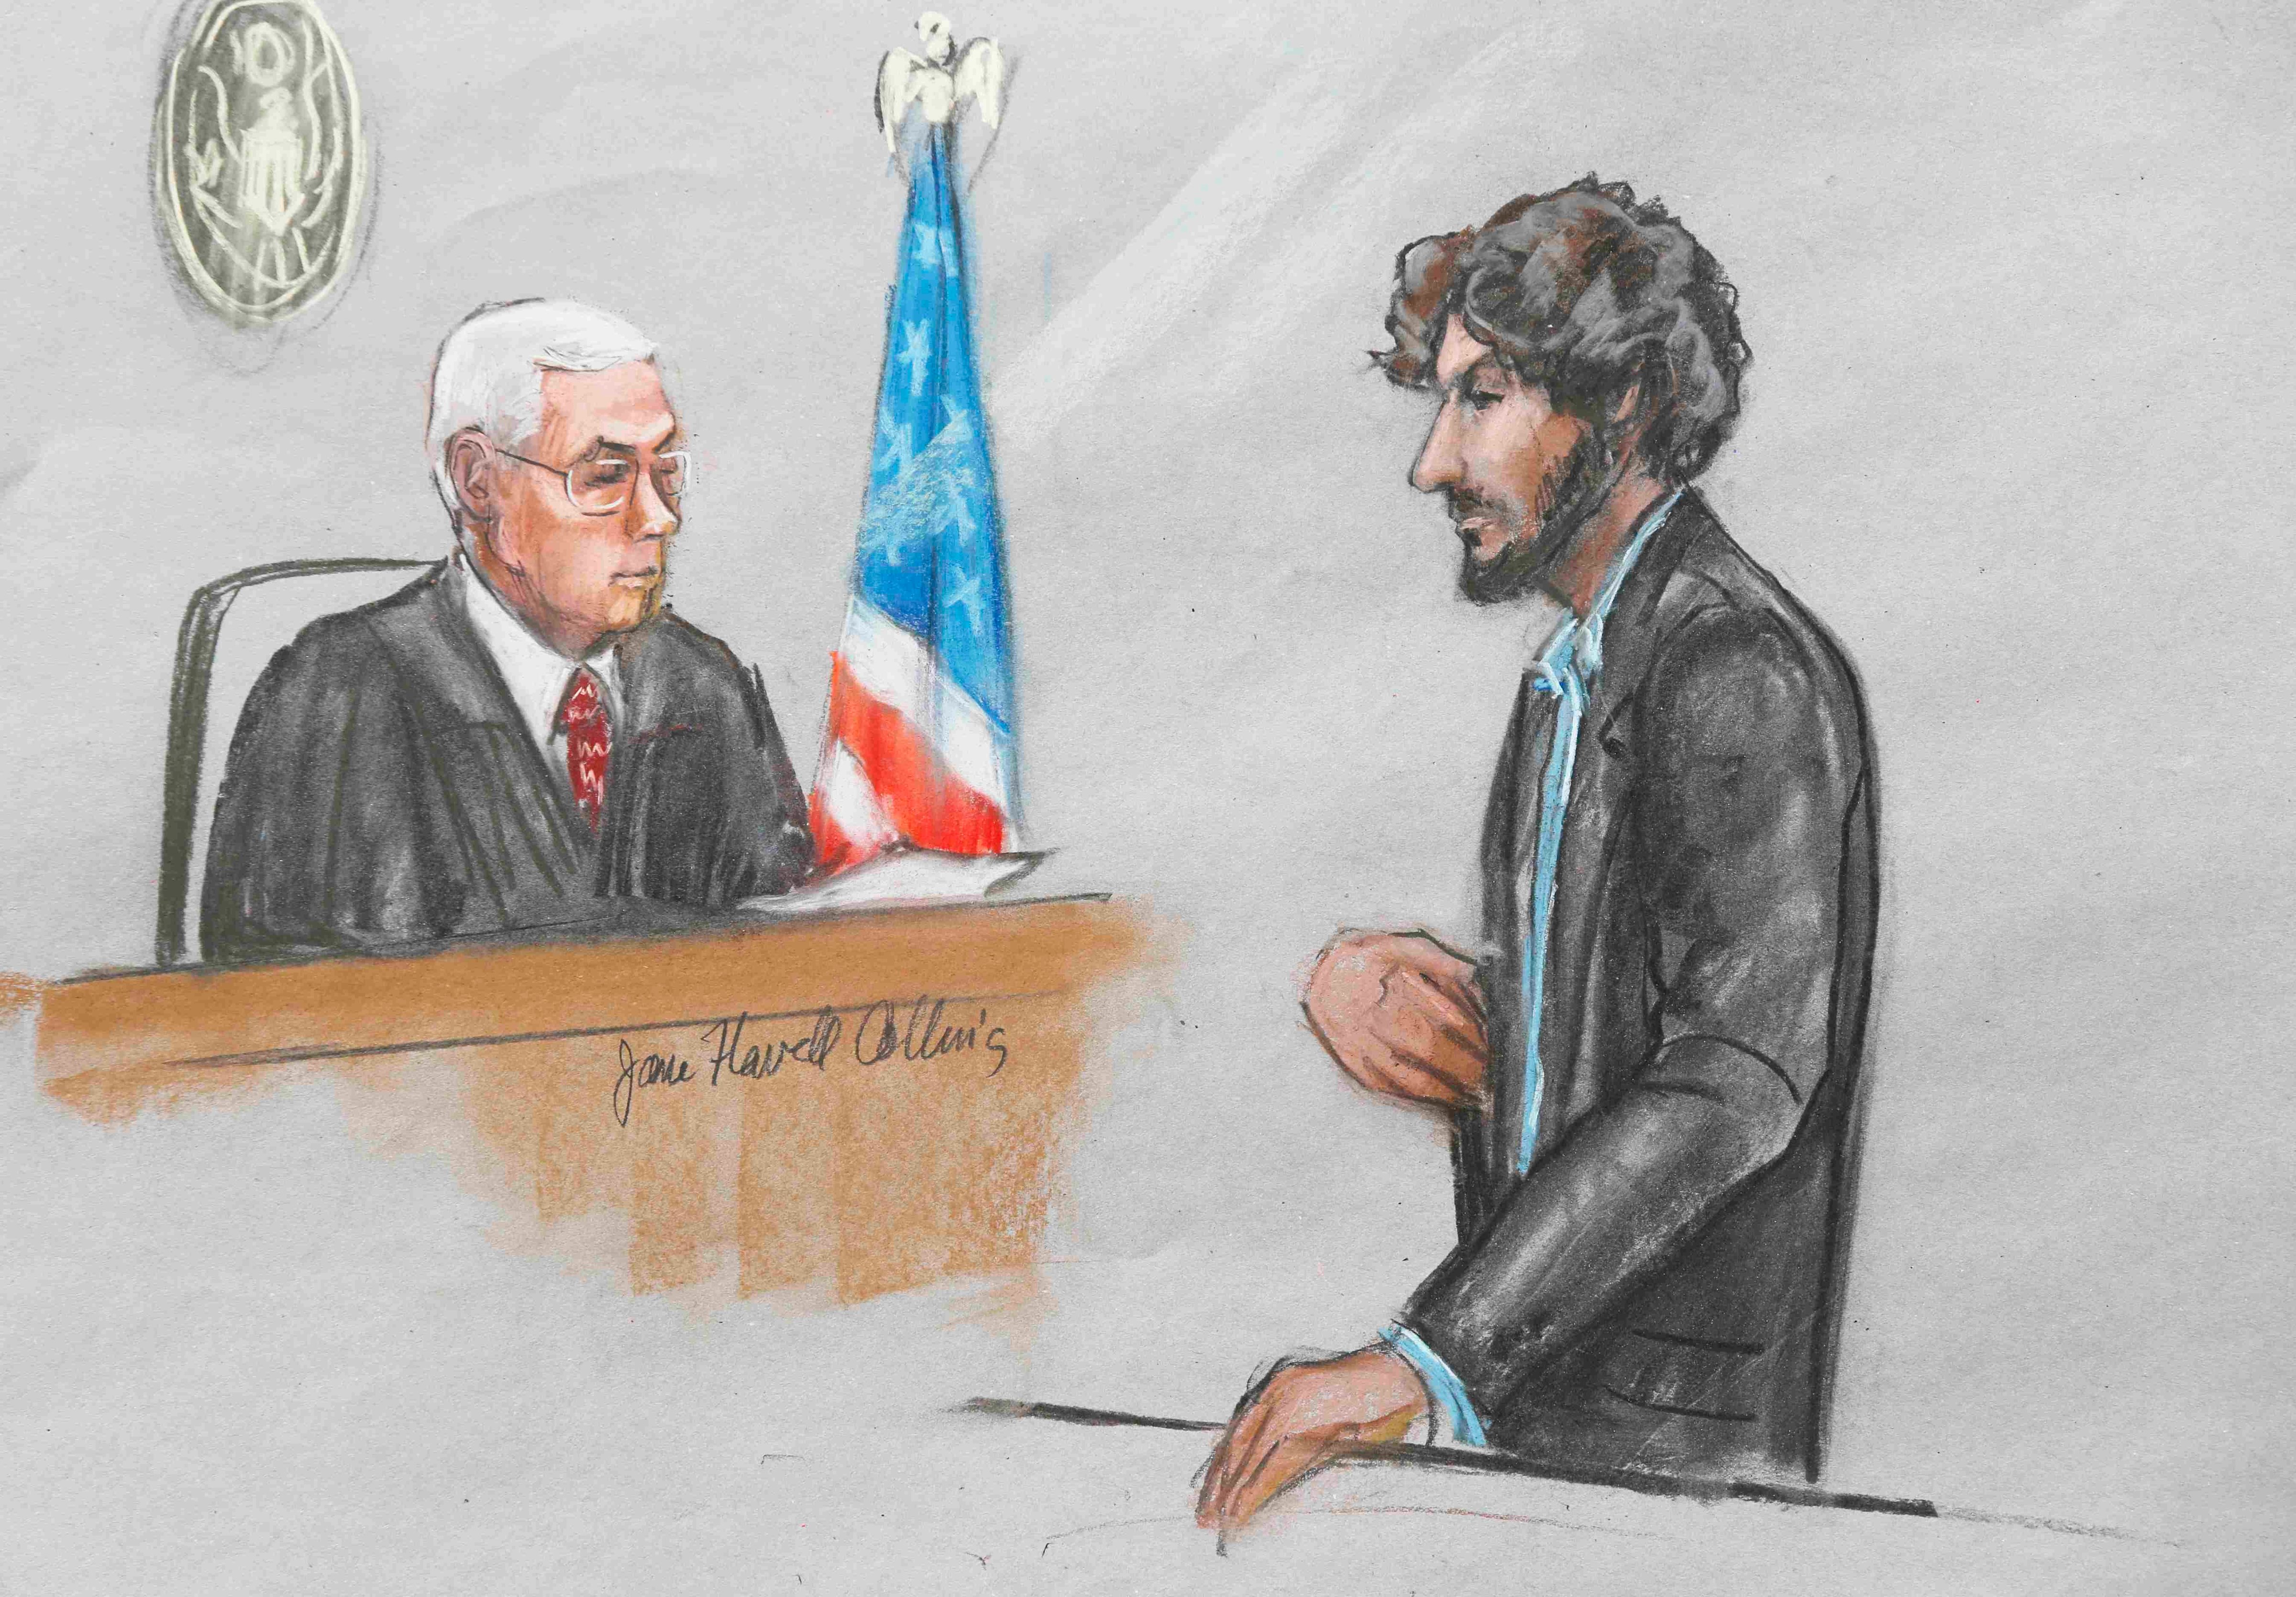 A courtroom sketch shows Boston Marathon bomber Dzhokhar Tsarnaev (R) speaking as U.S. District Judge George O'Toole looks on during his sentencing hearing in Boston, Mass. on June 24, 2015.